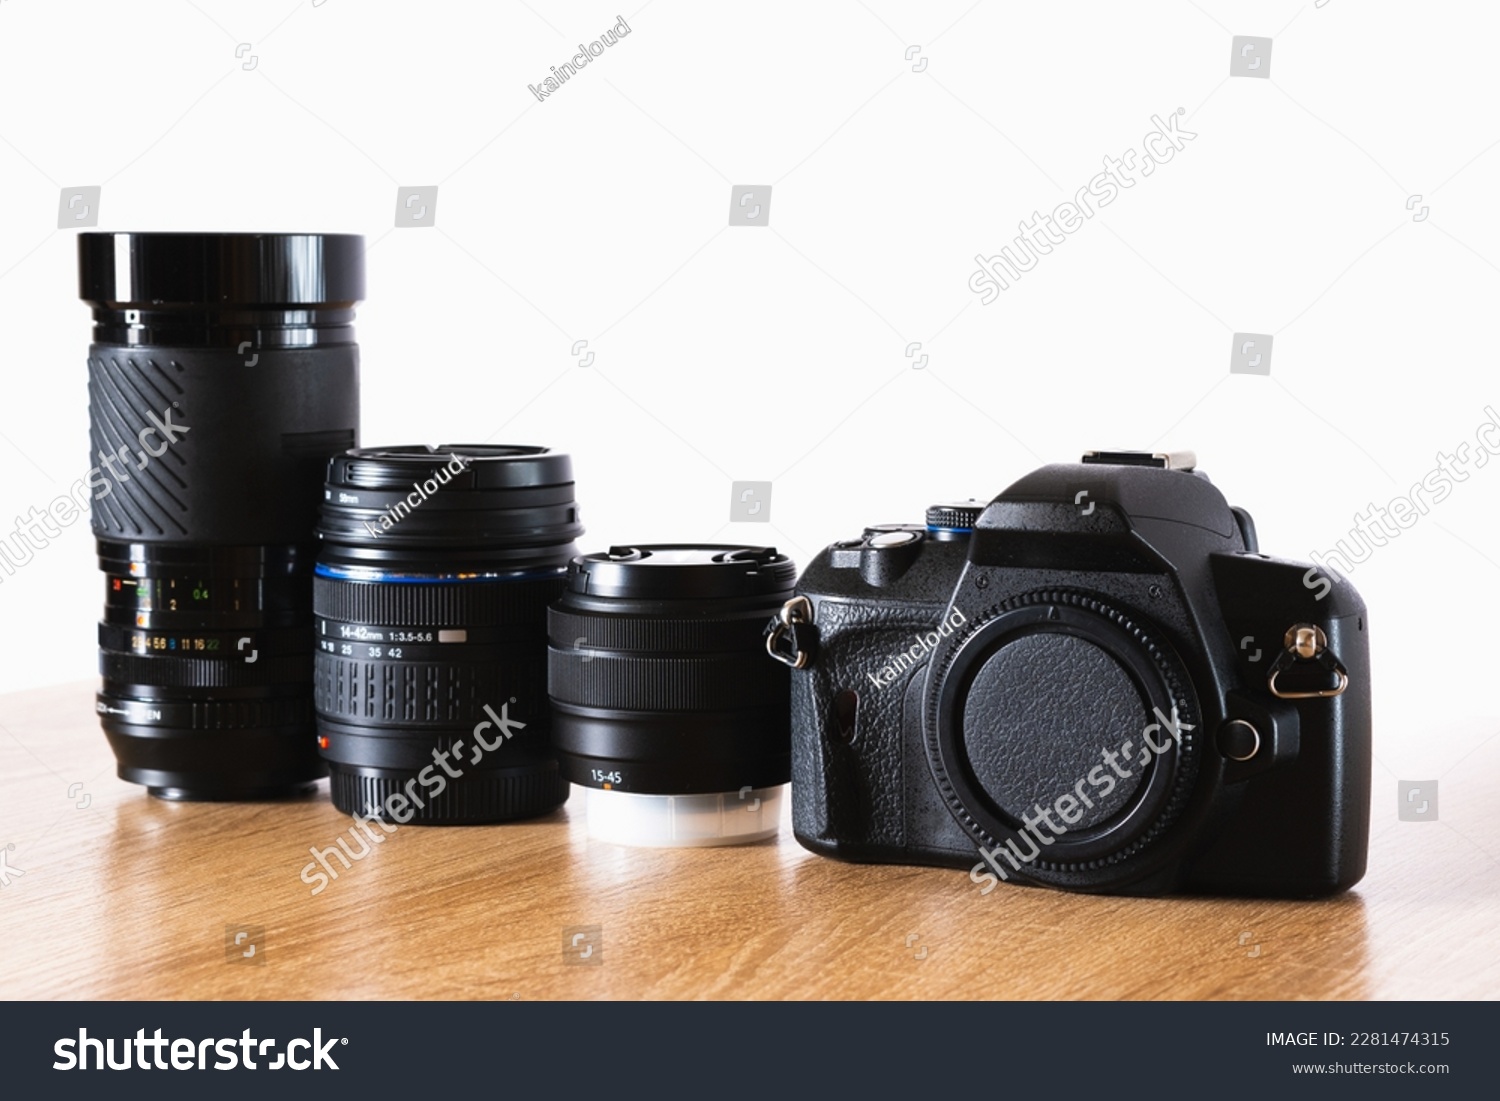 Photographic equipment kit, camera and photographic lenses lined up on wooden table, horizontal photography, photography theme, visual communication, side view #2281474315